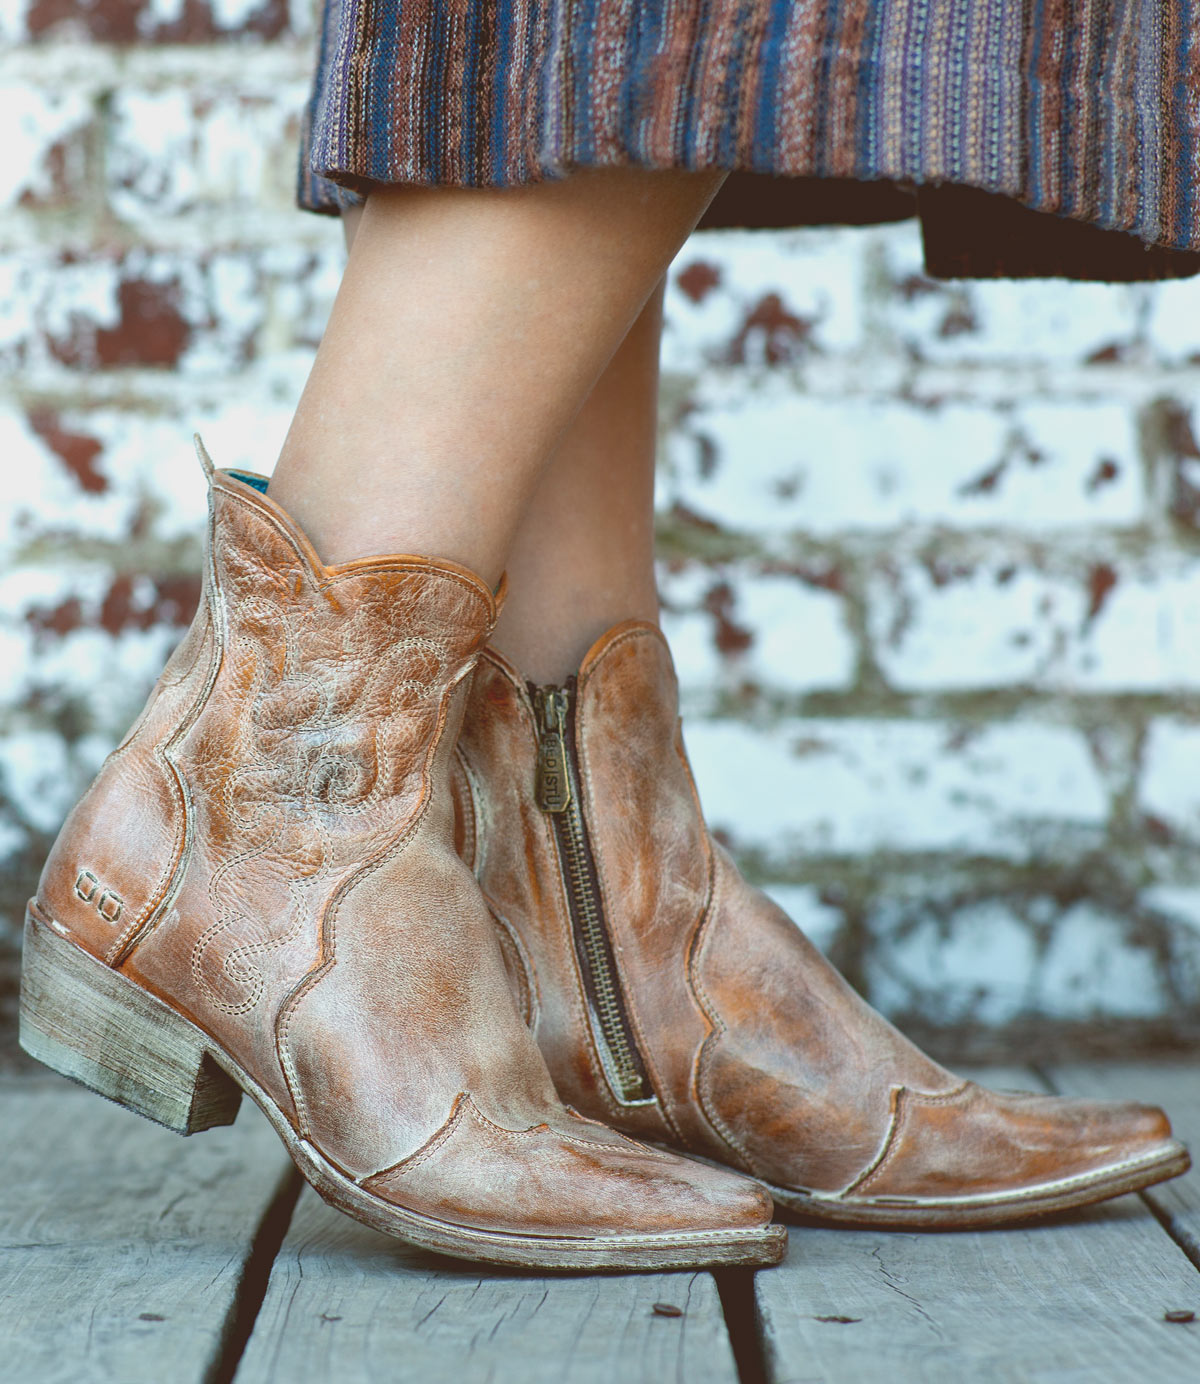 A woman donning a stylish pair of Bed Stu Ace leather cowboy boots.